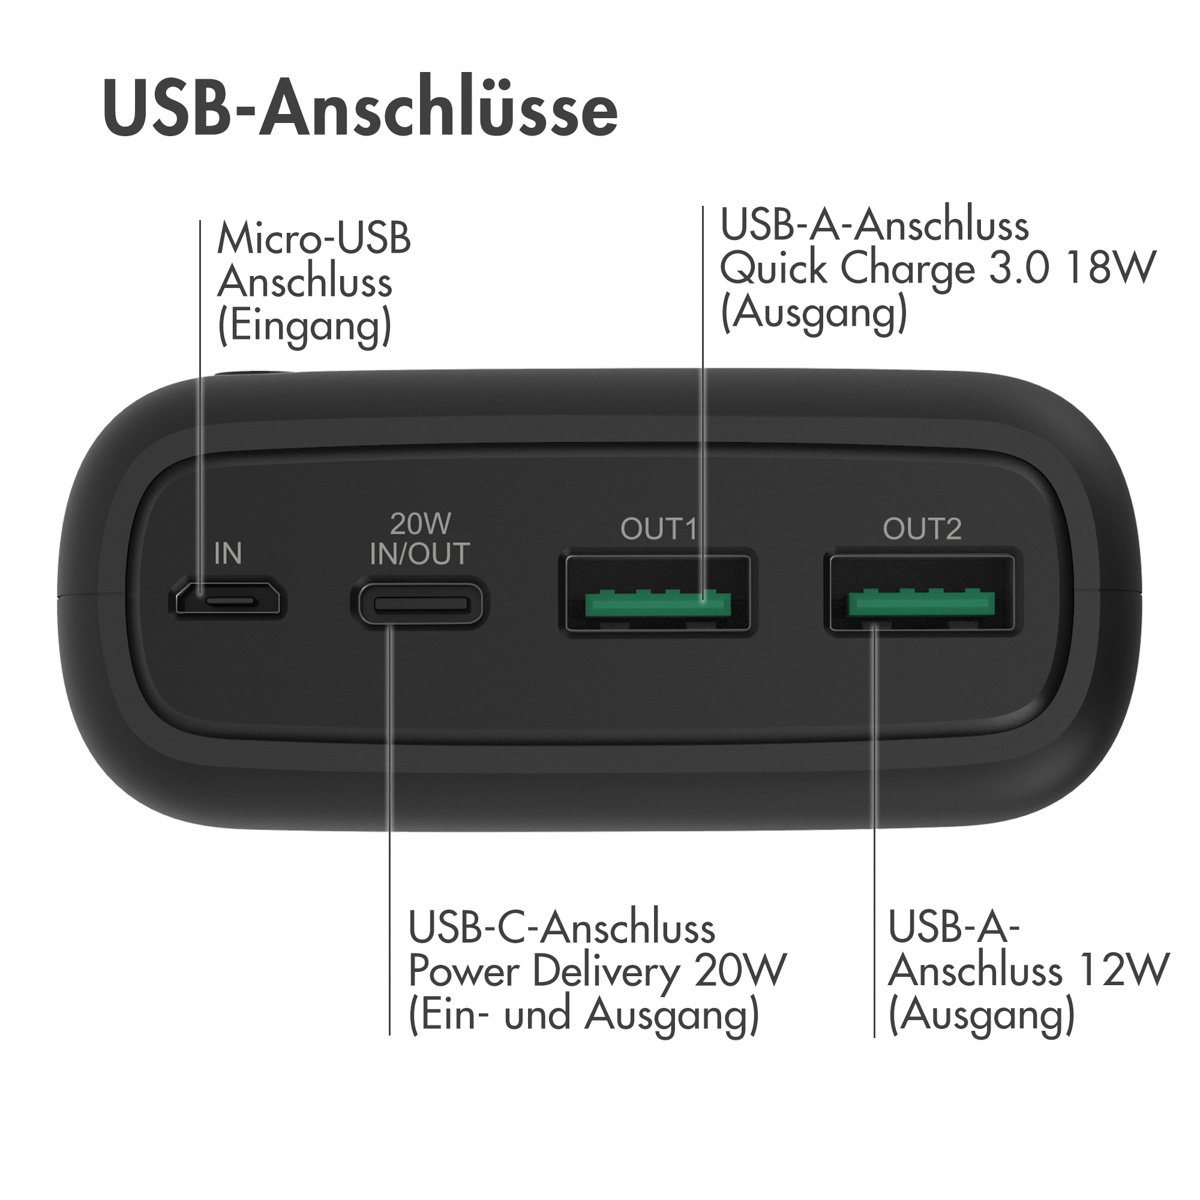 Schwarz mAh Quick IMOSHION Power 27000 & Powerbank Delivery Charge